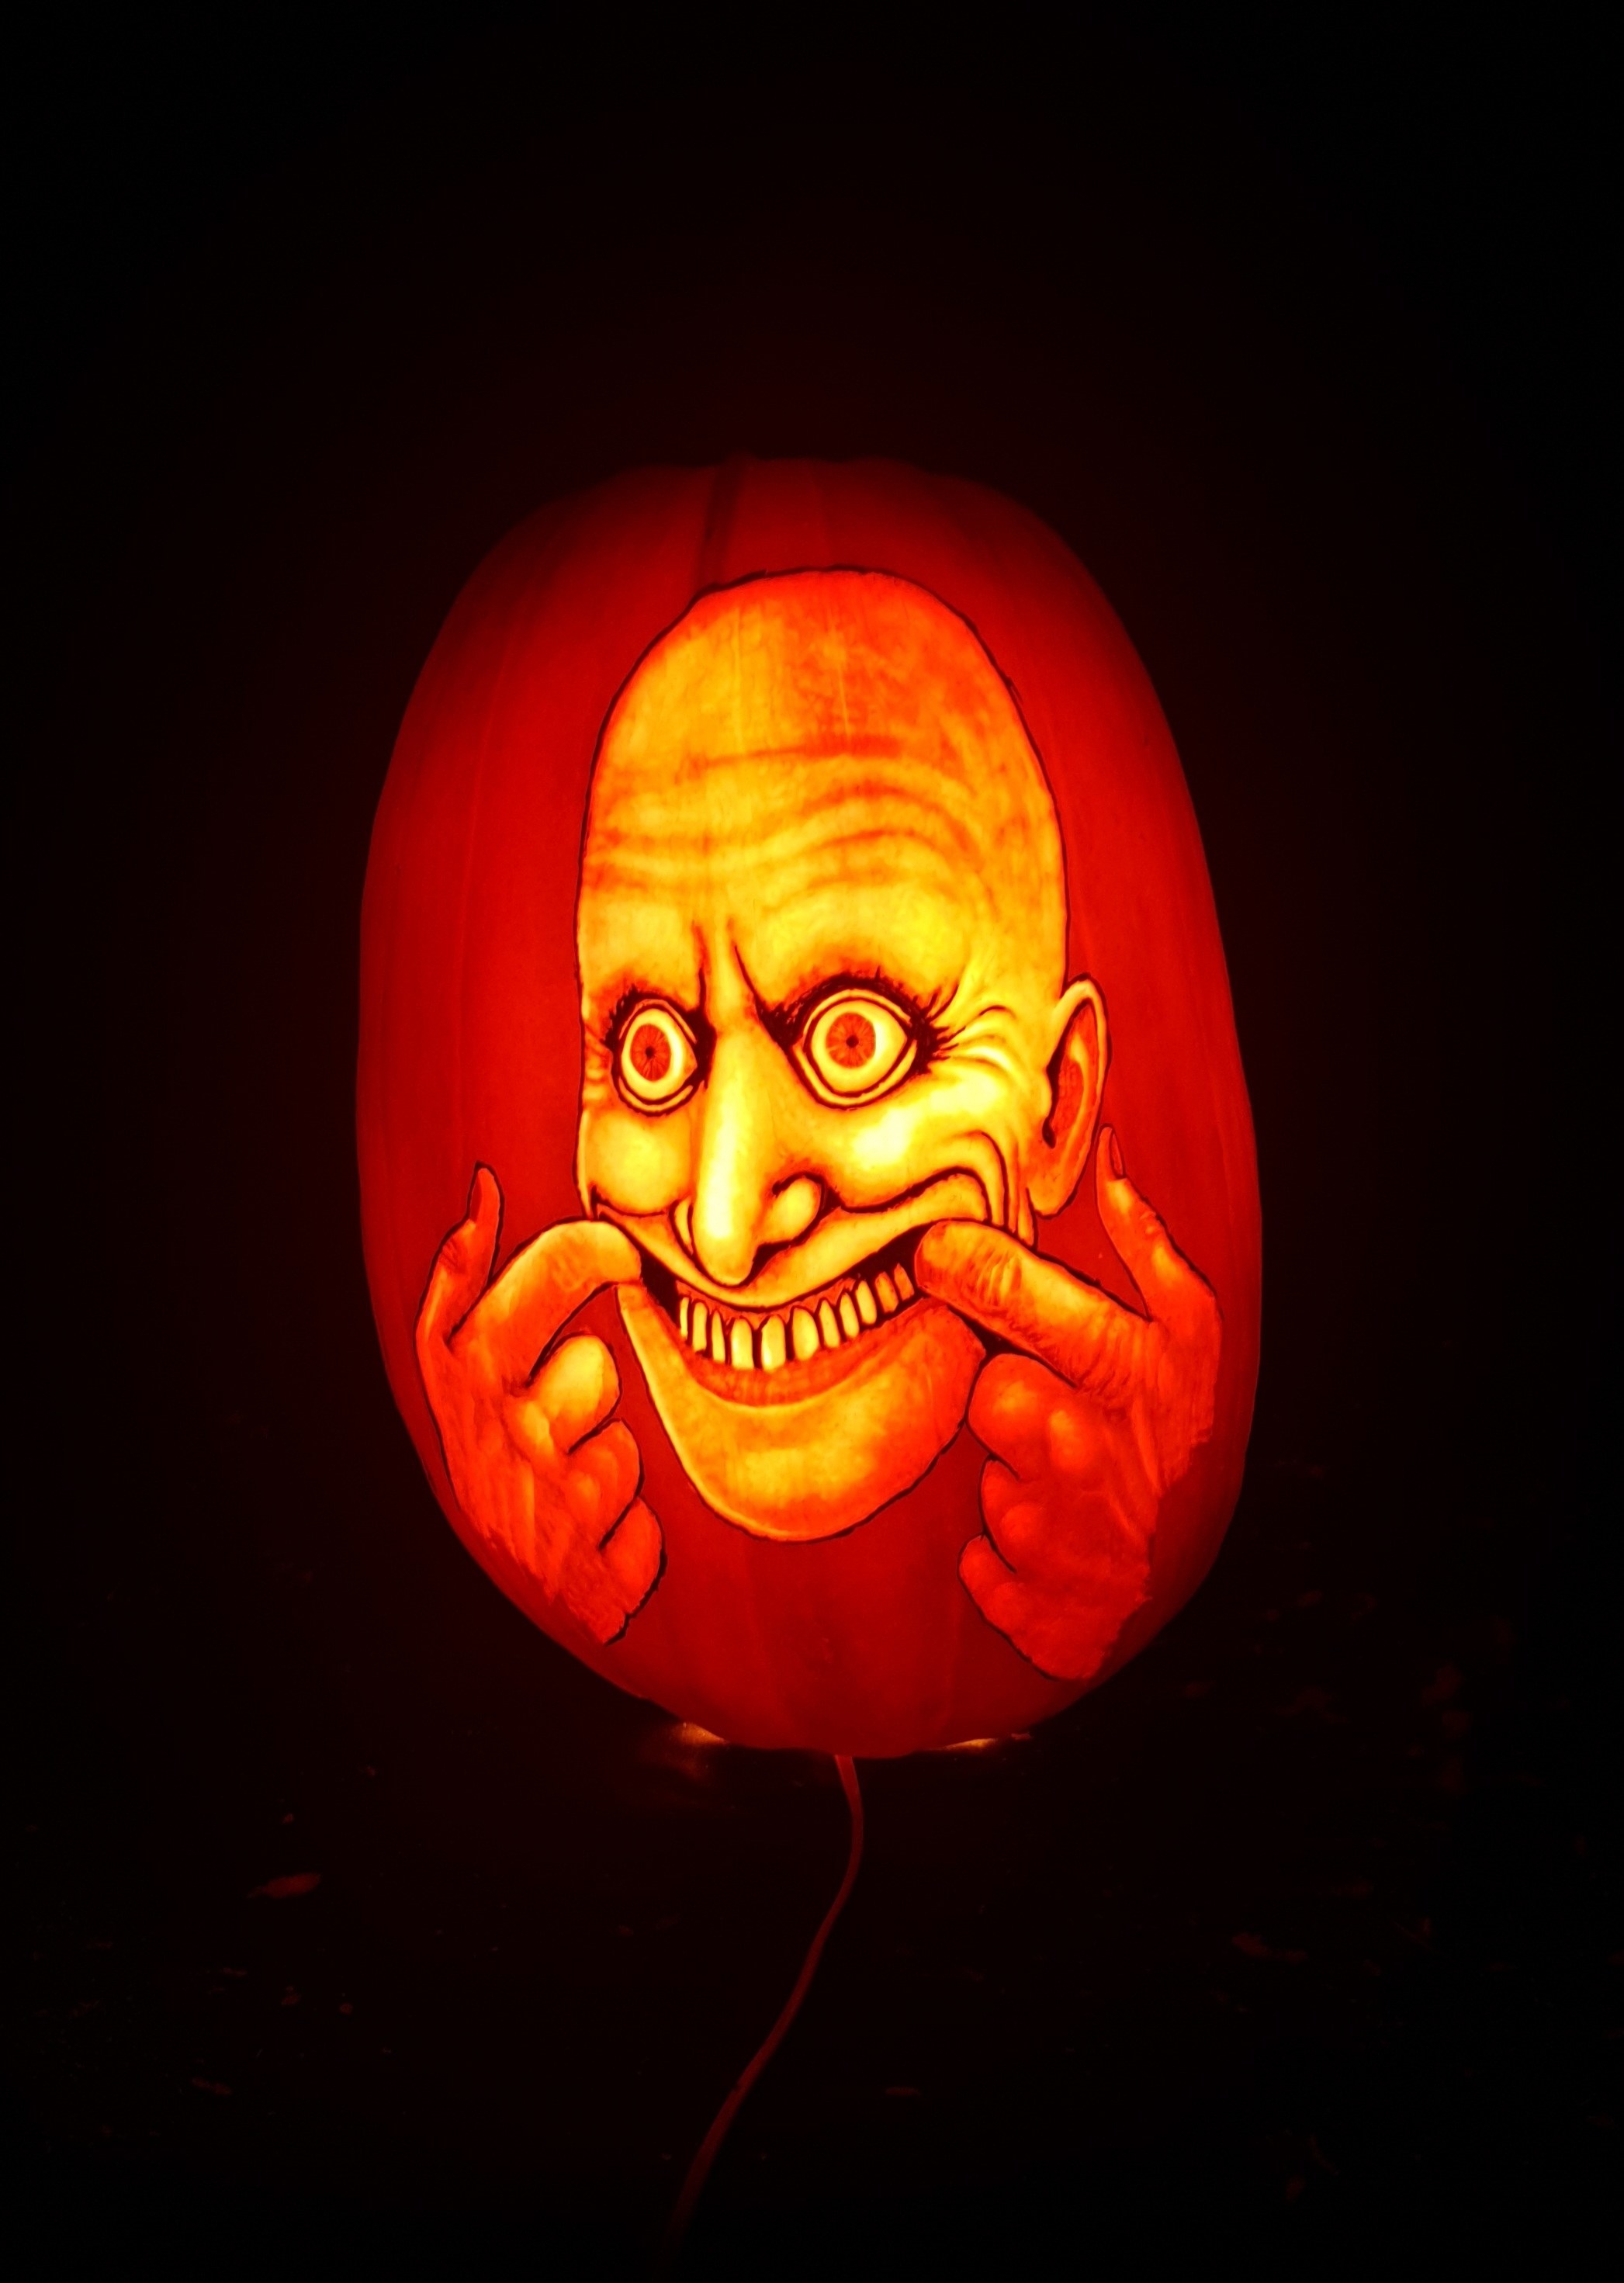 a scary character smiling carved on a pumpkin